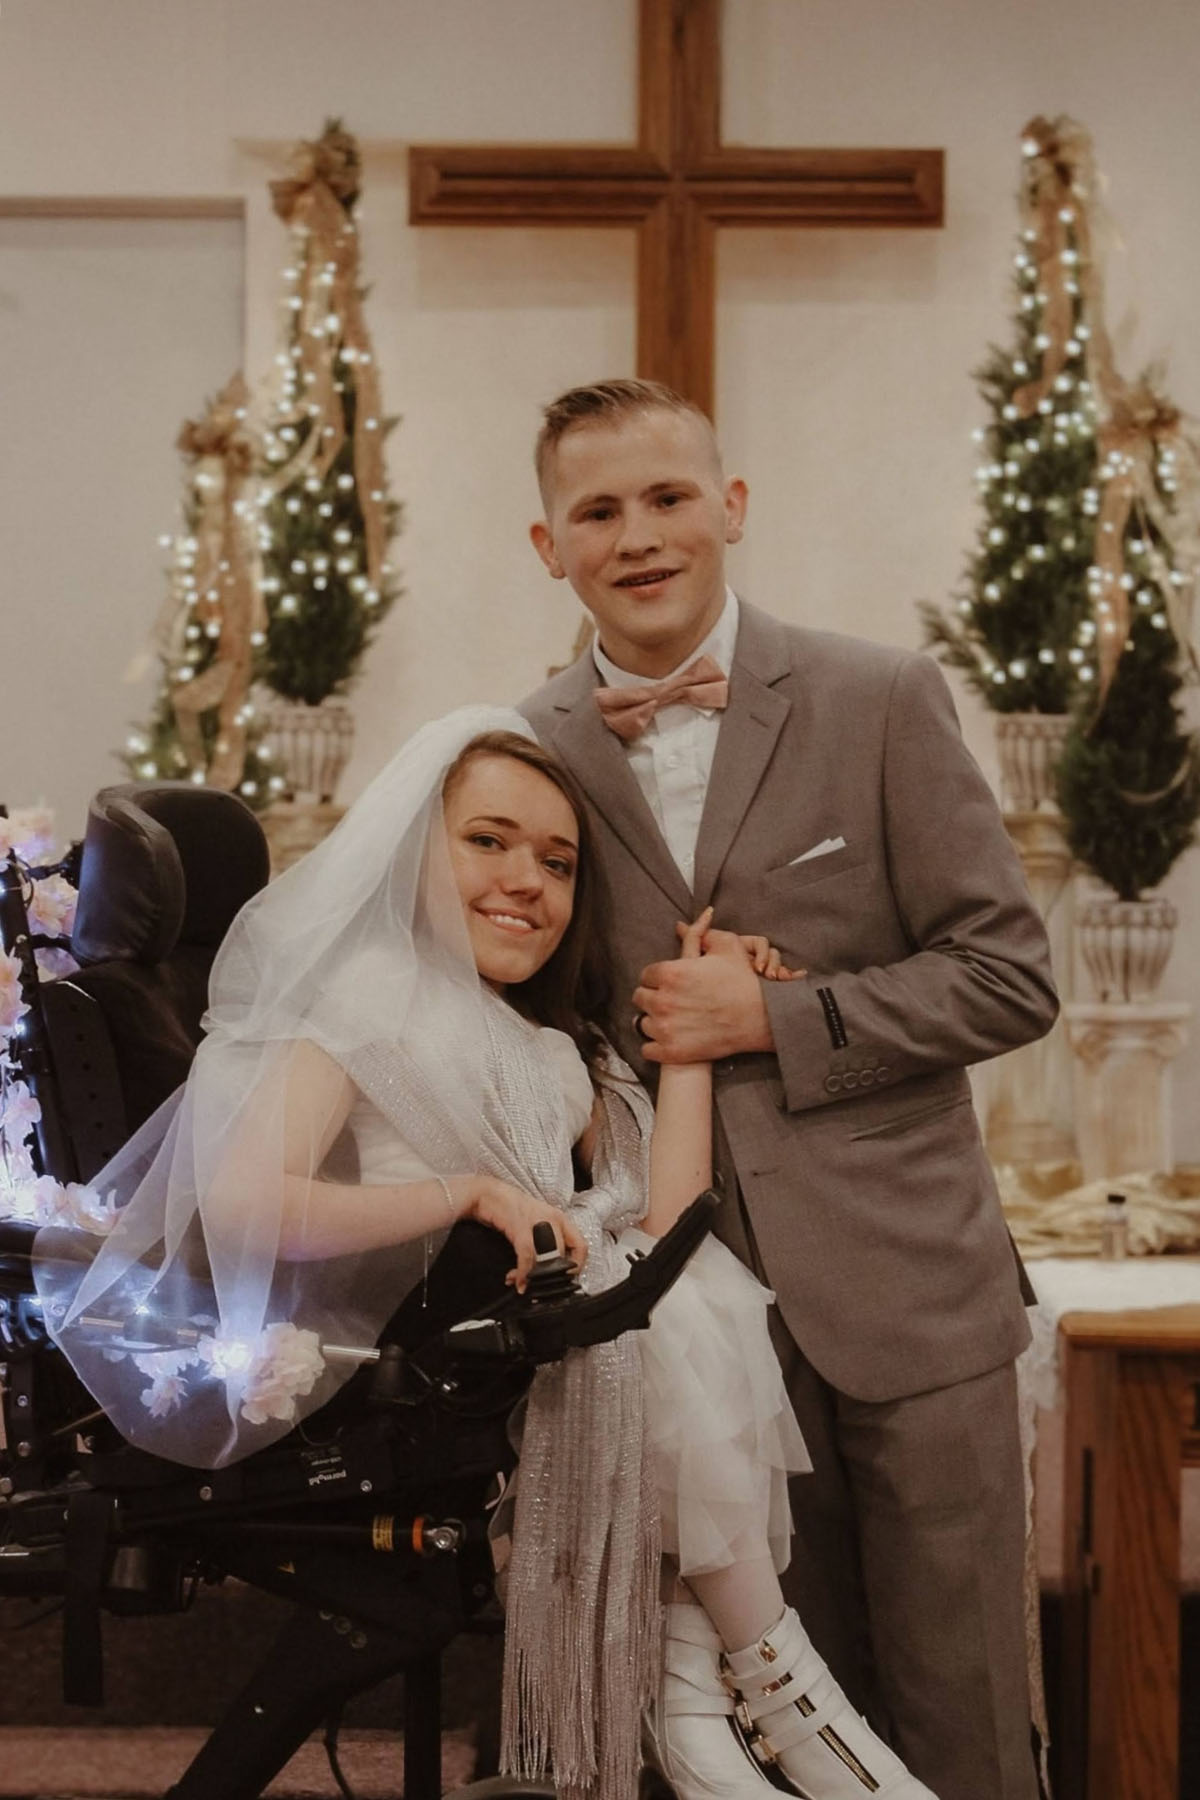 Amber Weise, wearing her wedding dress, and her husband hold hands in church during their wedding day.